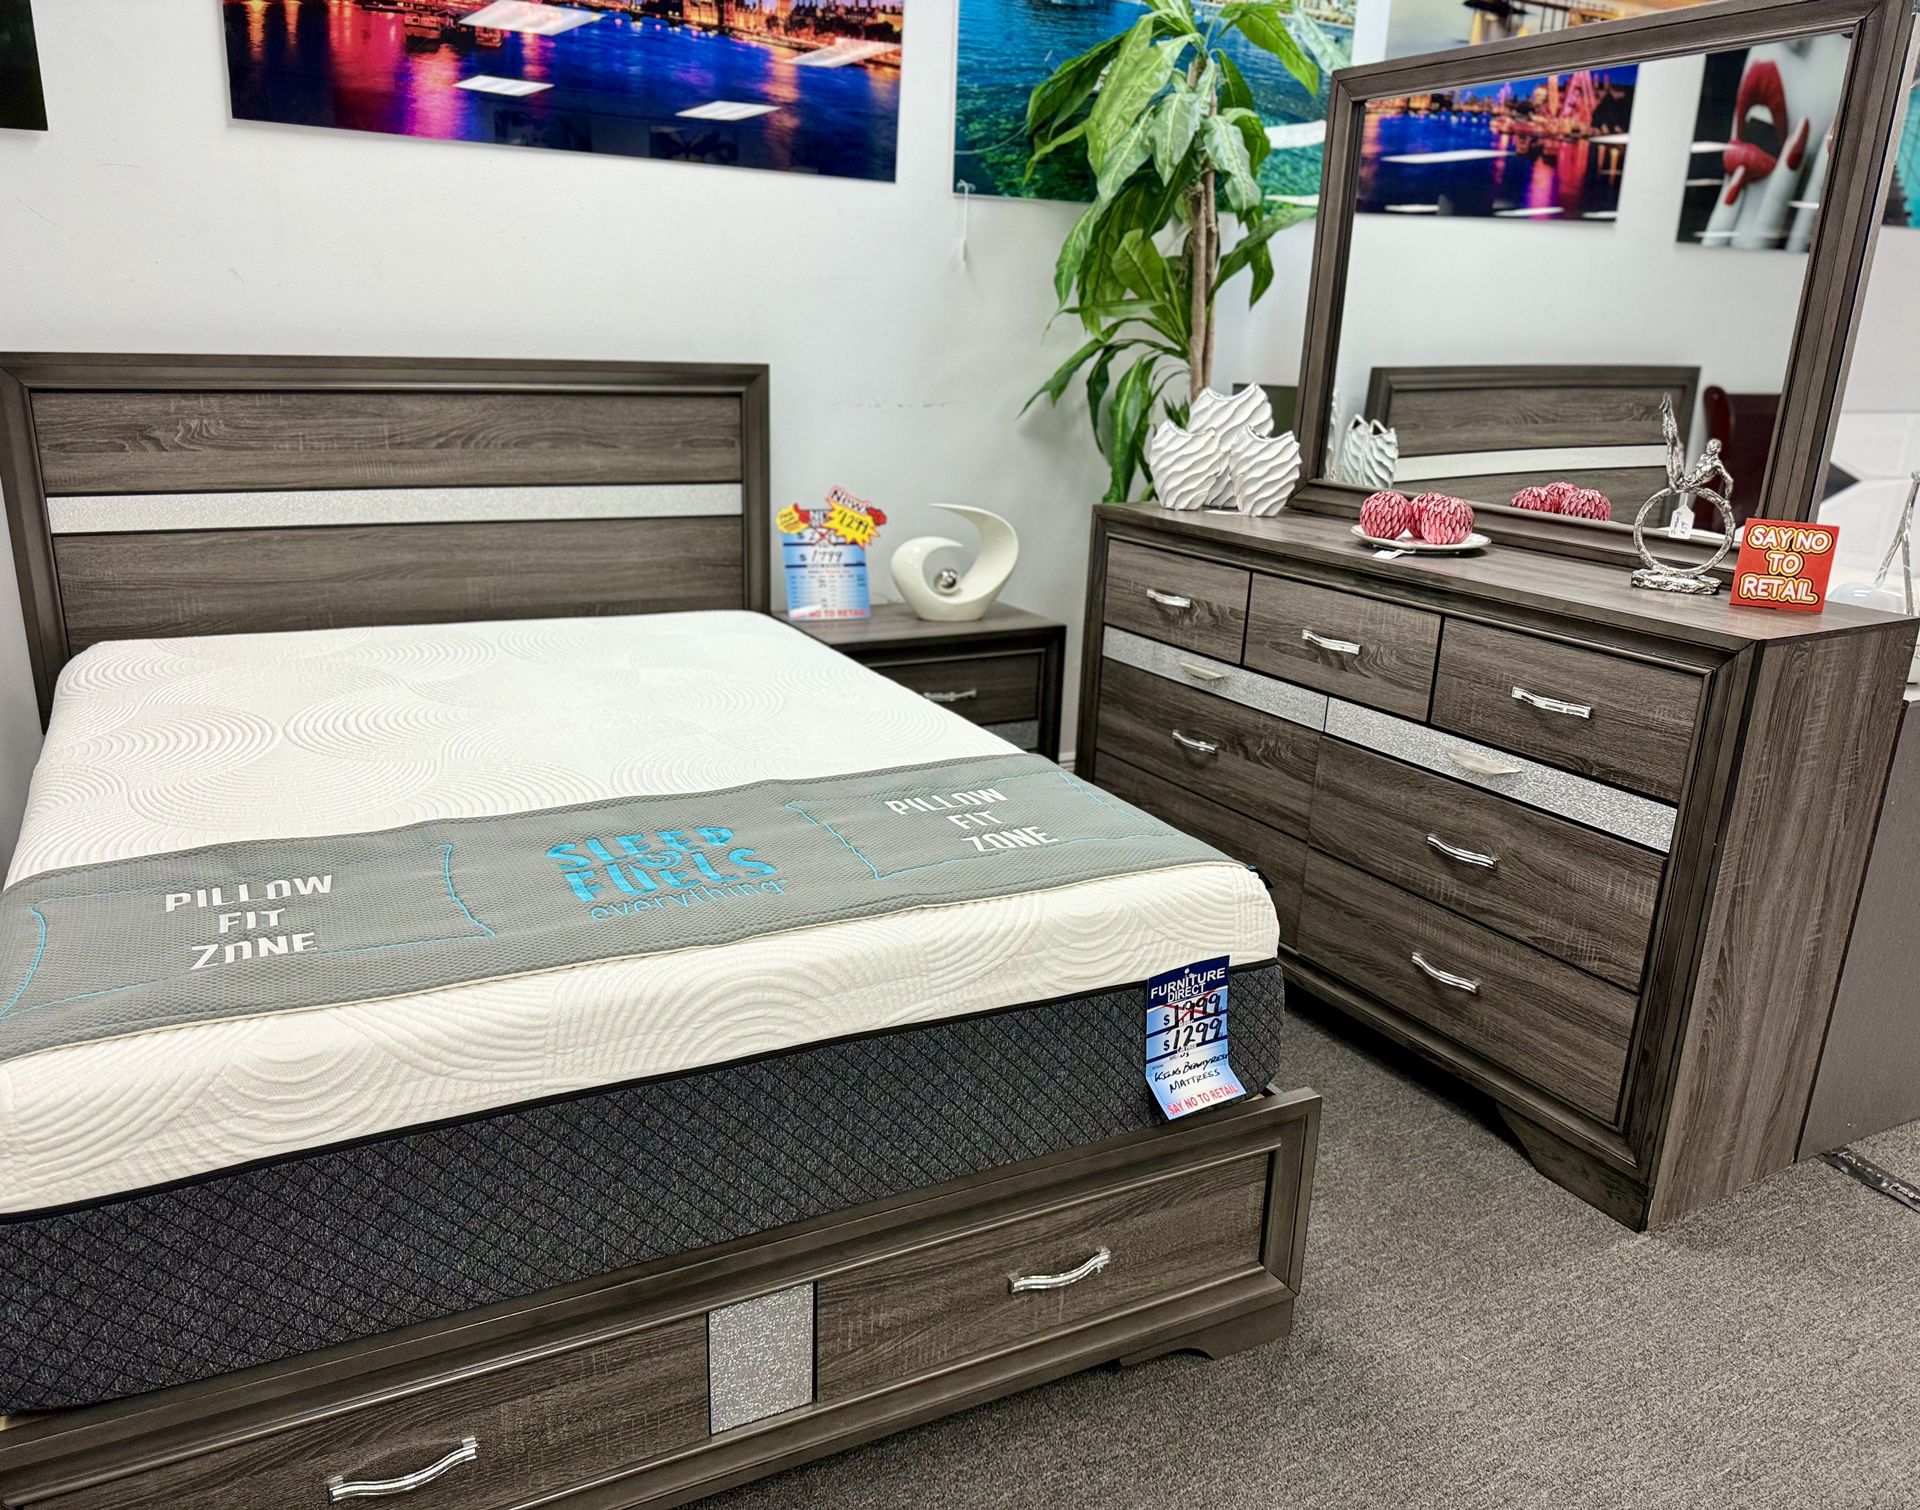 Glamorous 5pc Bed Set W/Storage Drawers Available Now $1199